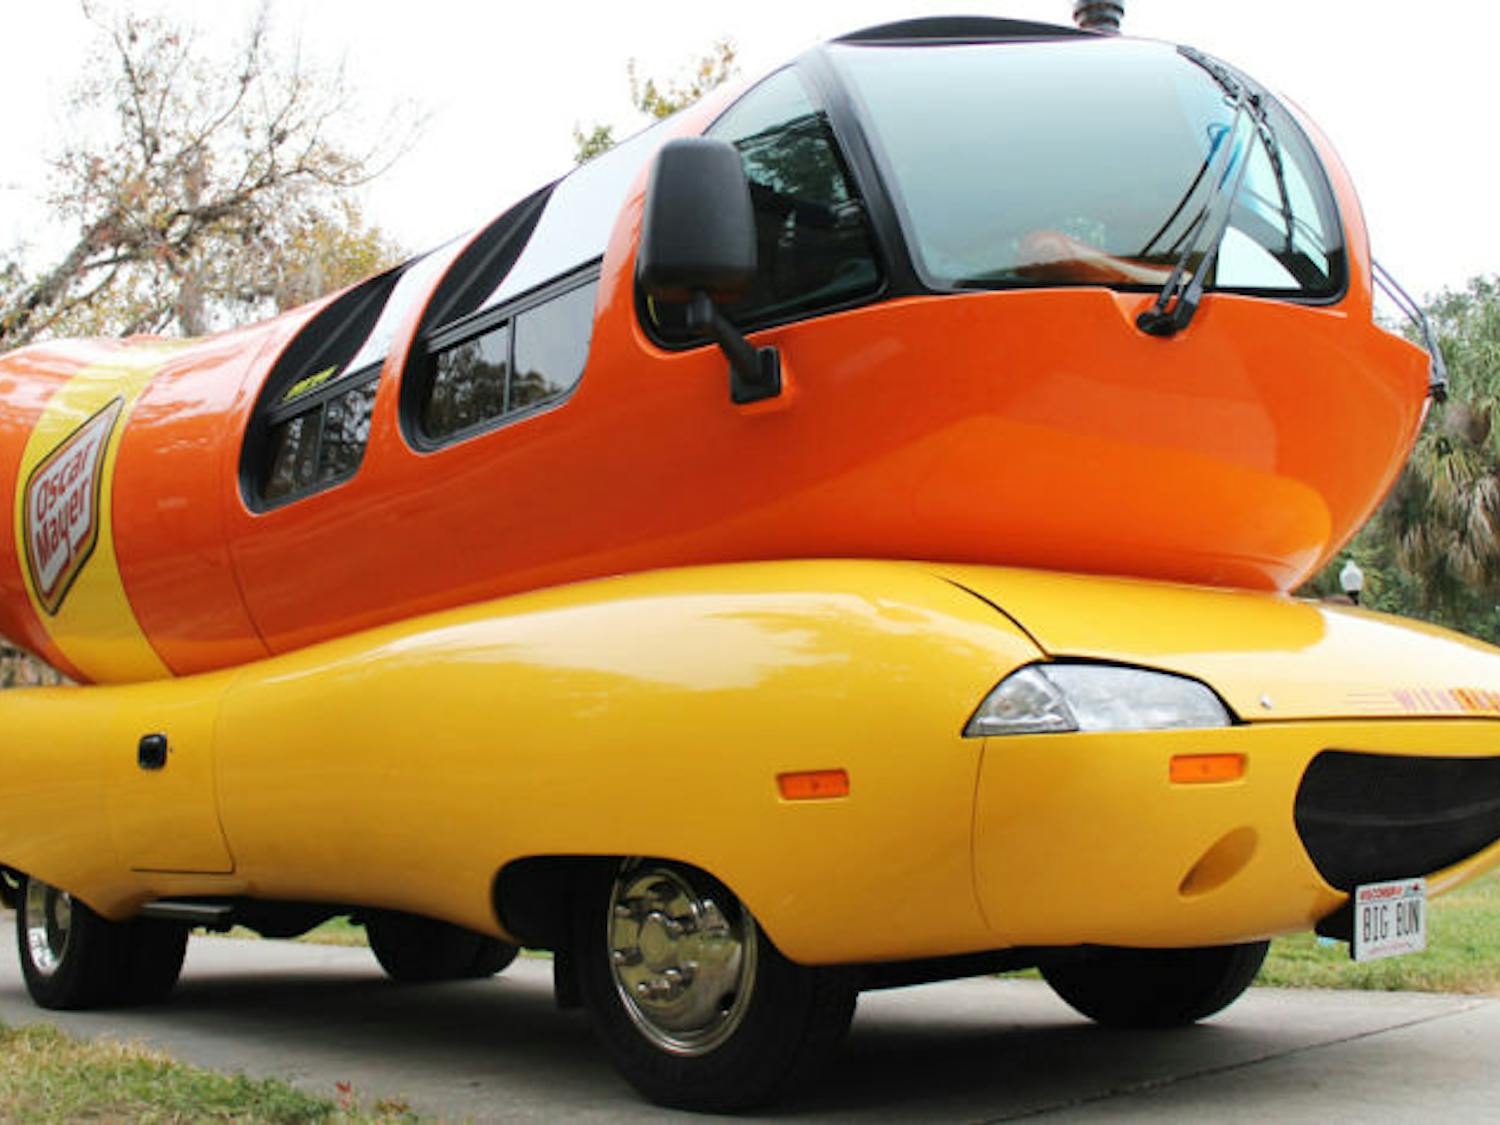 The Wienermobile is returning to campus Tuesday to recruit drivers. Hotdoggers roam the country in the 27-foot long hot dog with wheels promoting the Oscar Mayer employment opportunity.